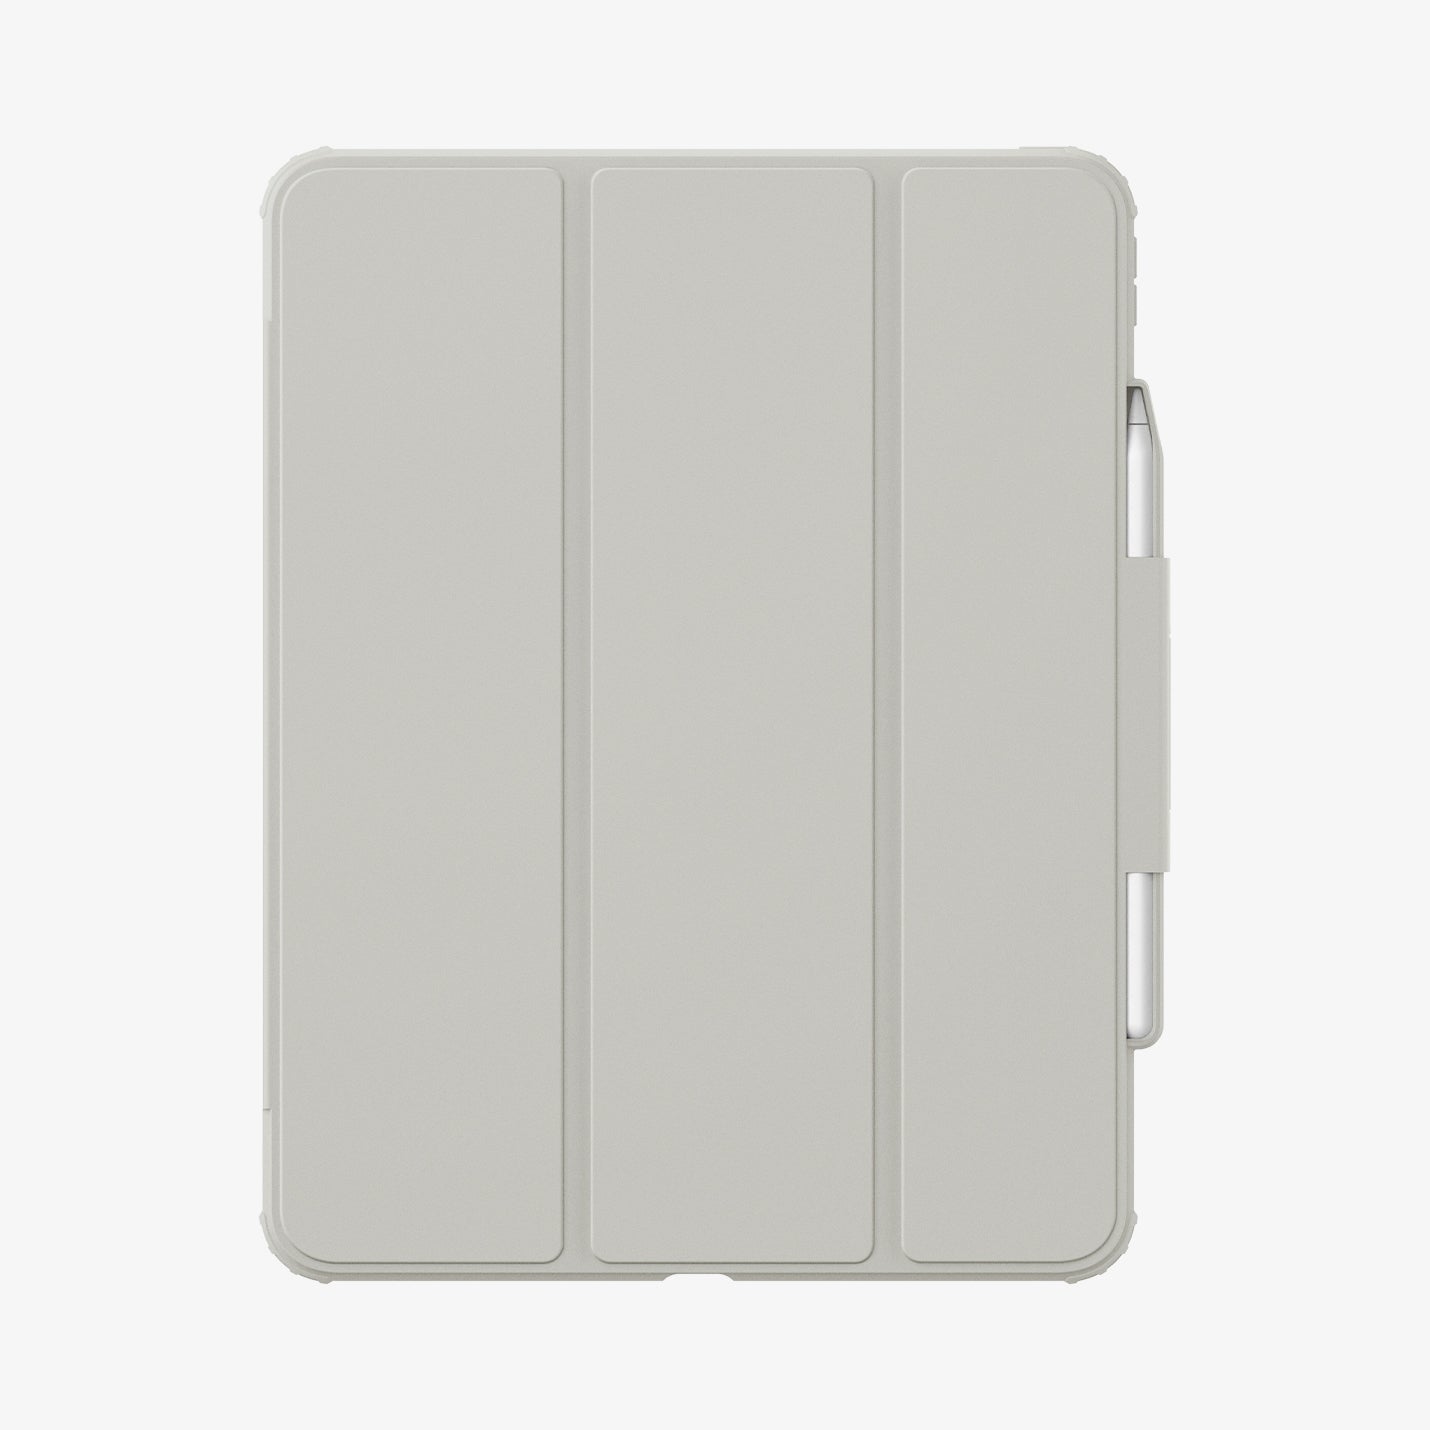 ACS07014 - iPad Pro 12.9-inch Case Air Skin Pro in Gray showing the front with s-pen attached